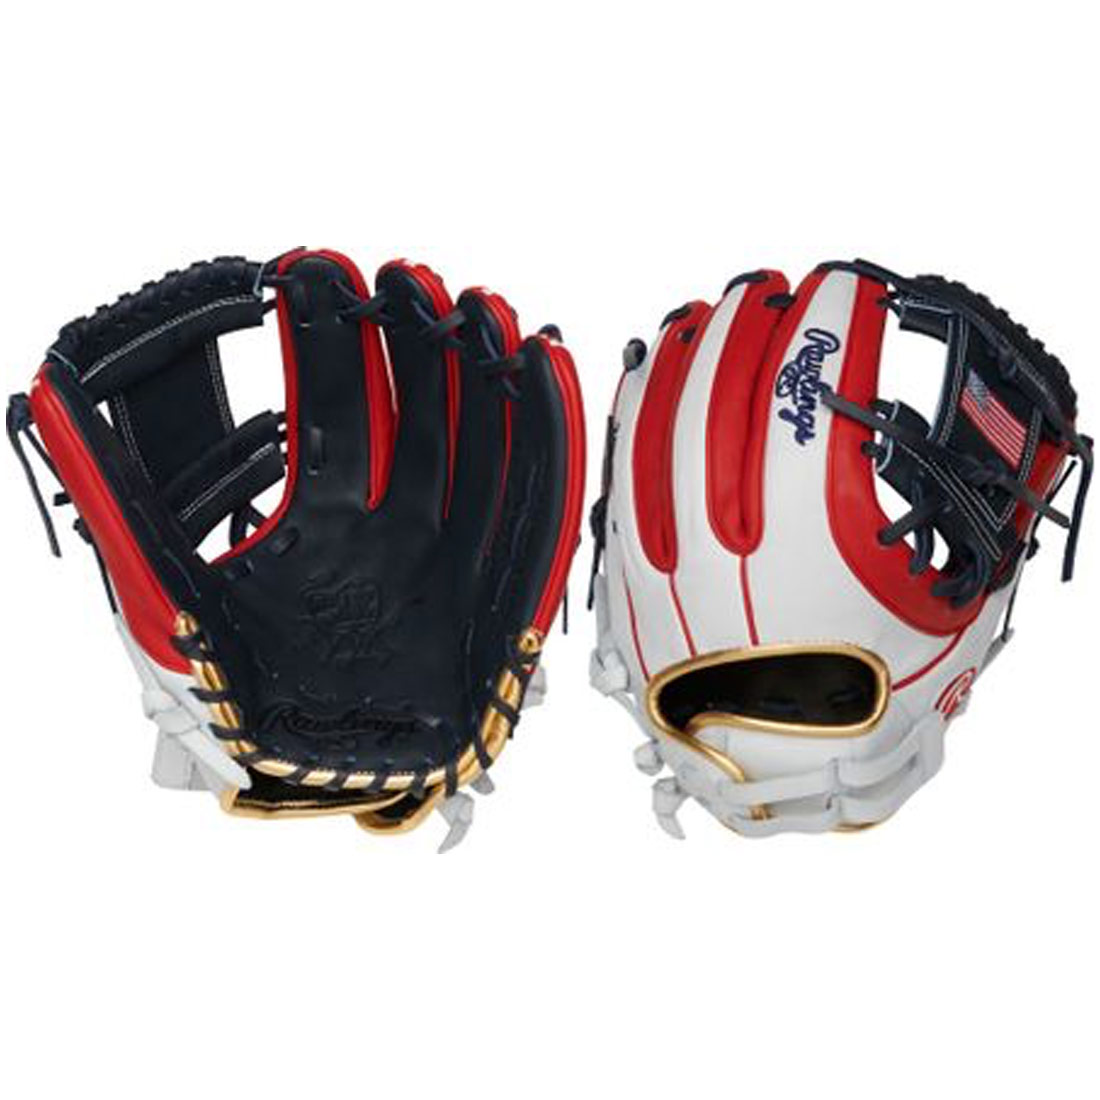 Rawlings Heart of the Hide Limited Edition Fastpitch Softball Glove 12\" PRO716SB-2USA